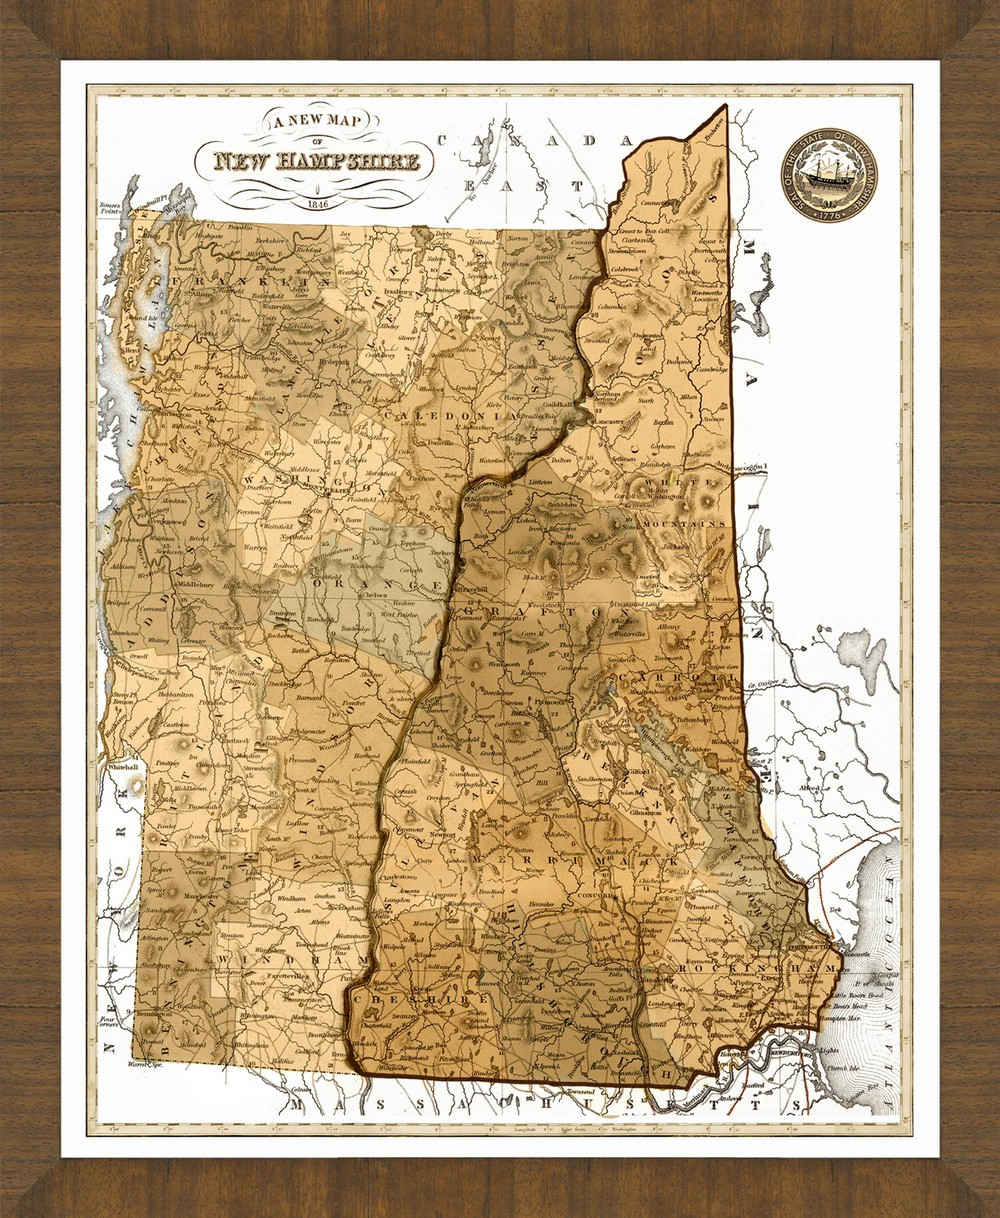 Old Map of New Hampshire